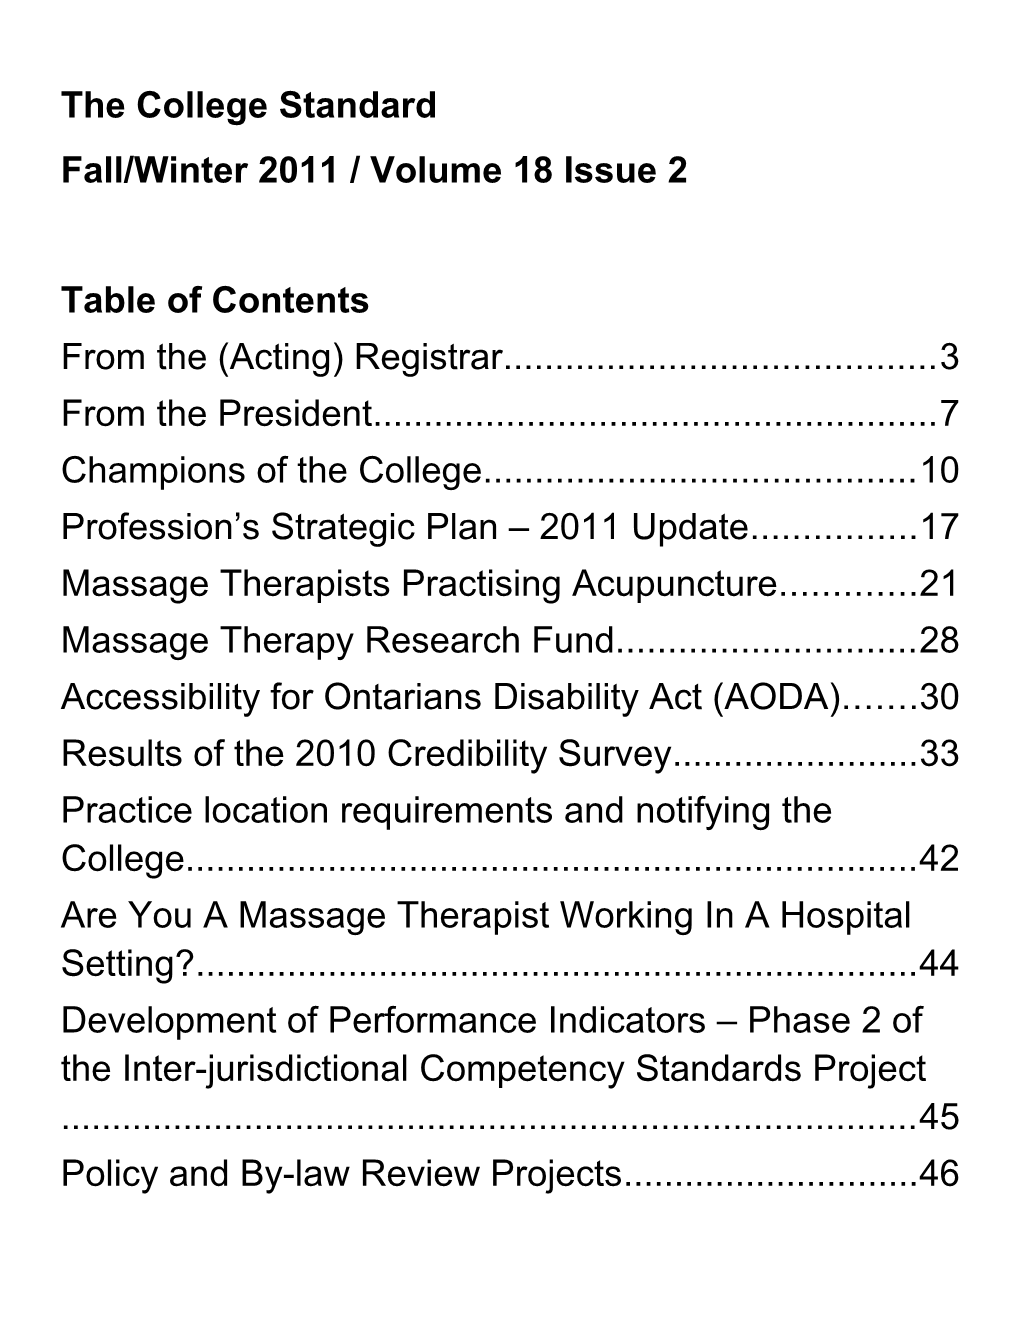 Fall/Winter 2011 / Volume 18 Issue 2